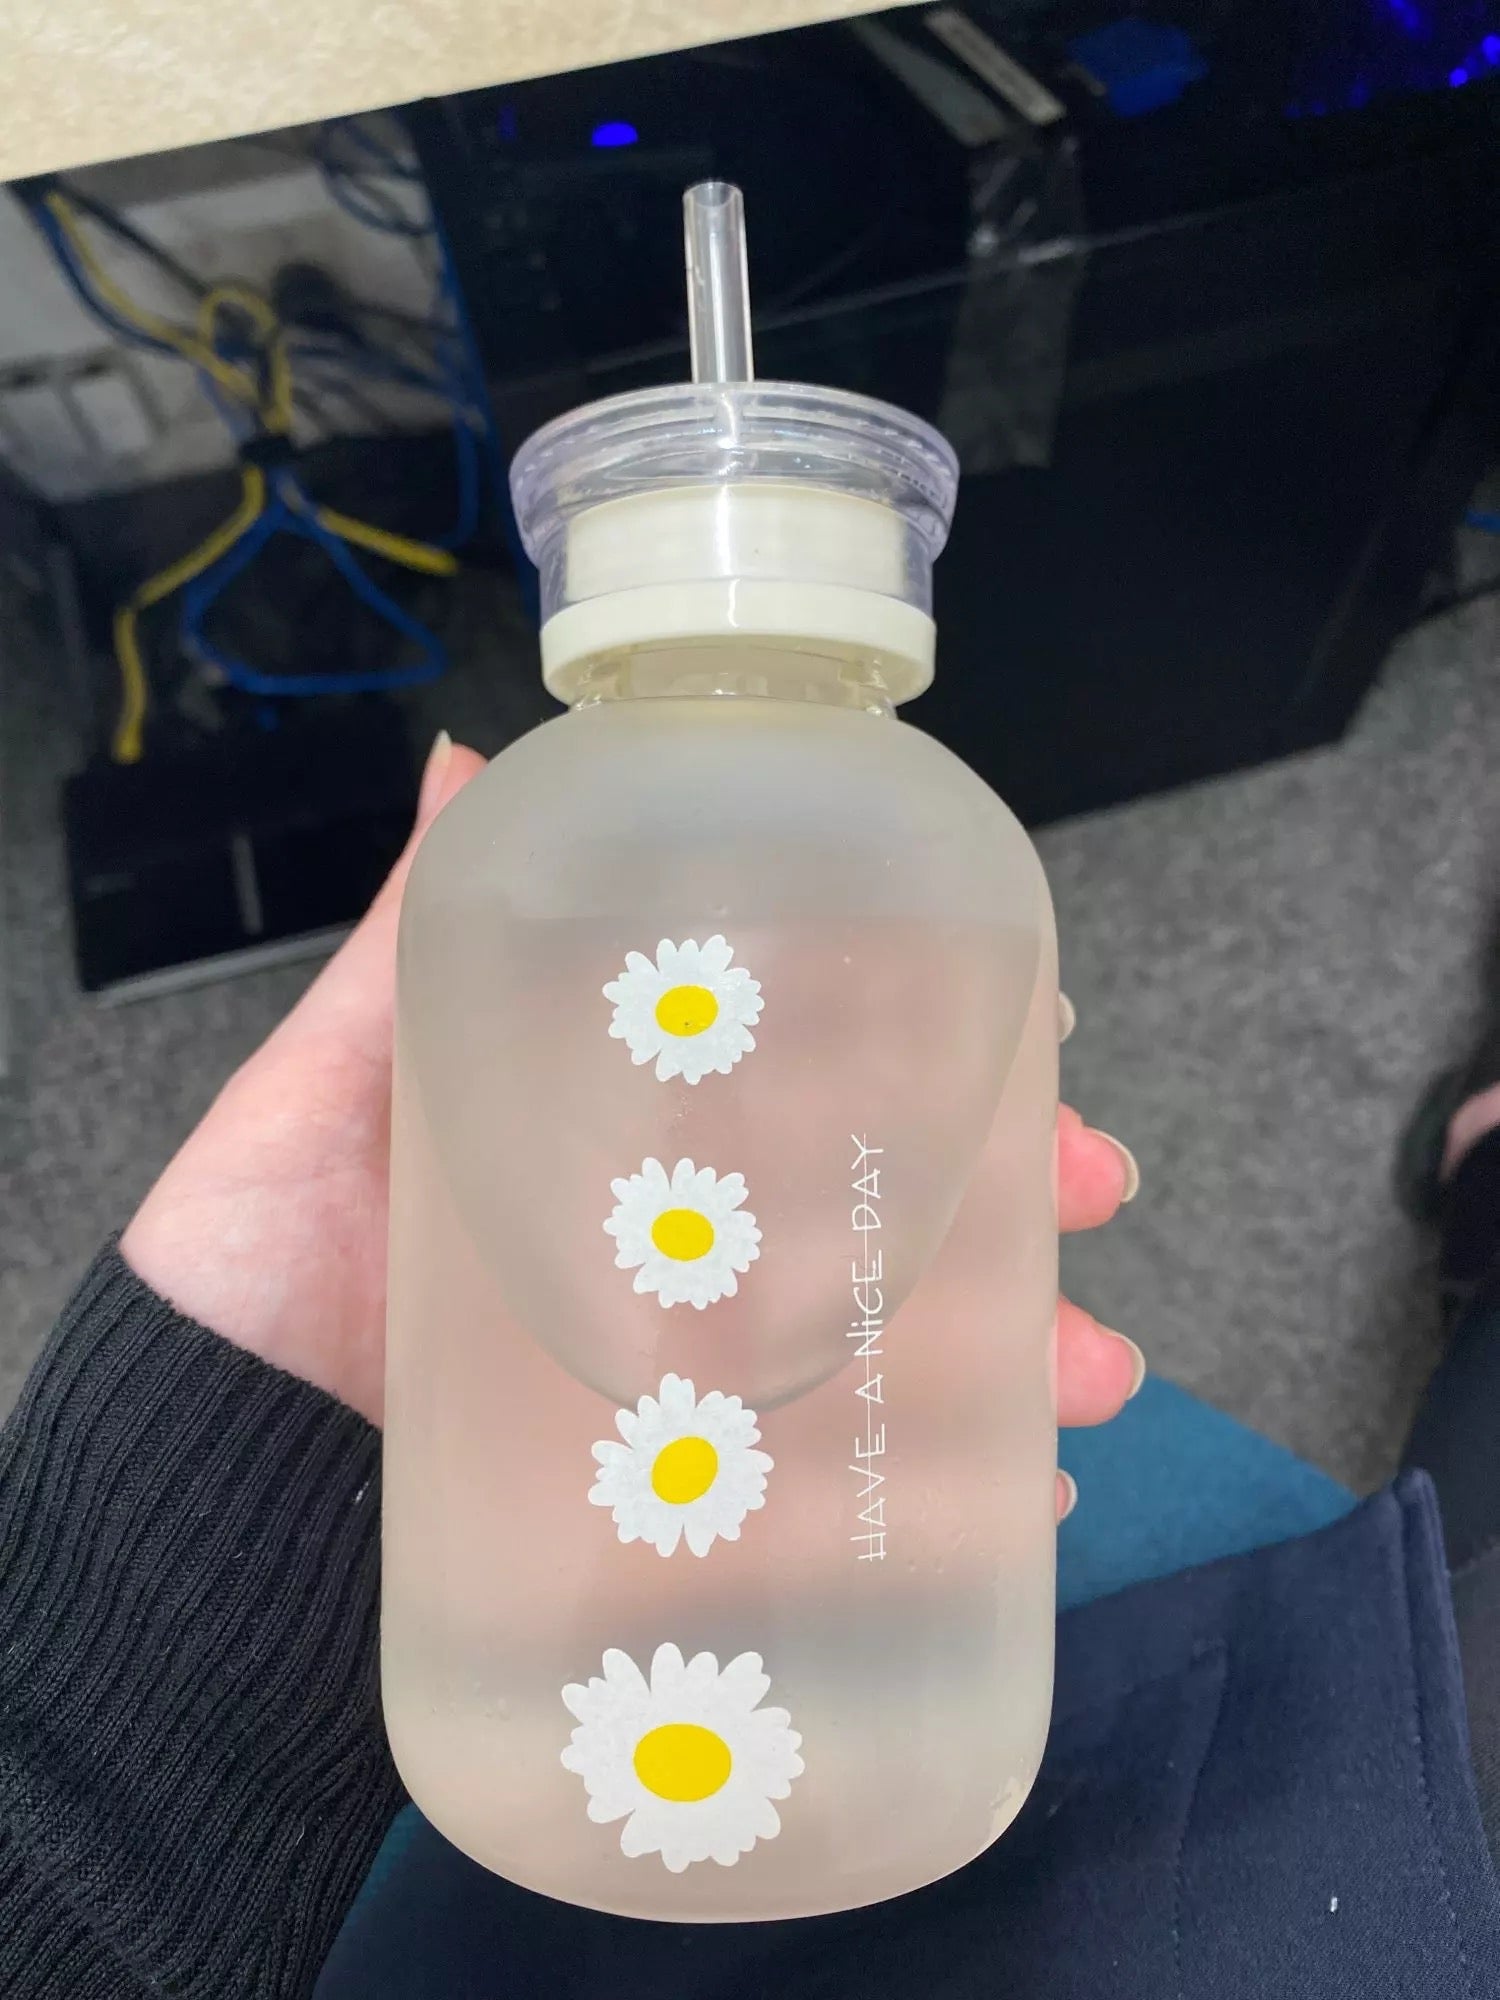 Have a Nice Day Glass Water bottle